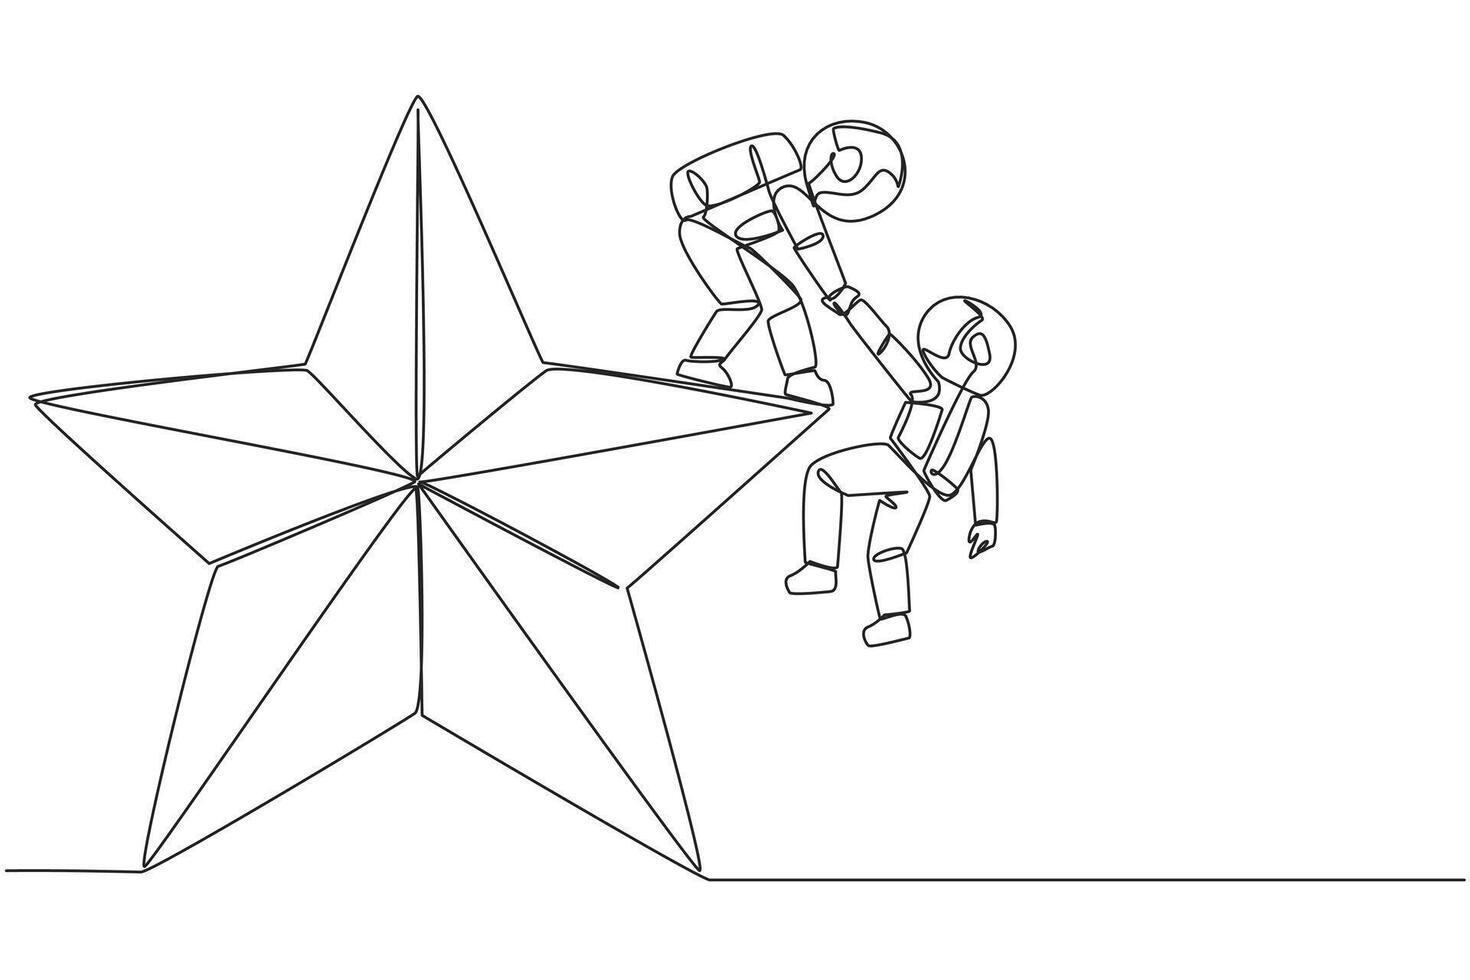 Continuous one line drawing astronaut helps colleague climb big star. Metaphor of achieving dreams of success together. Have a very good career position. Single line draw design illustration vector